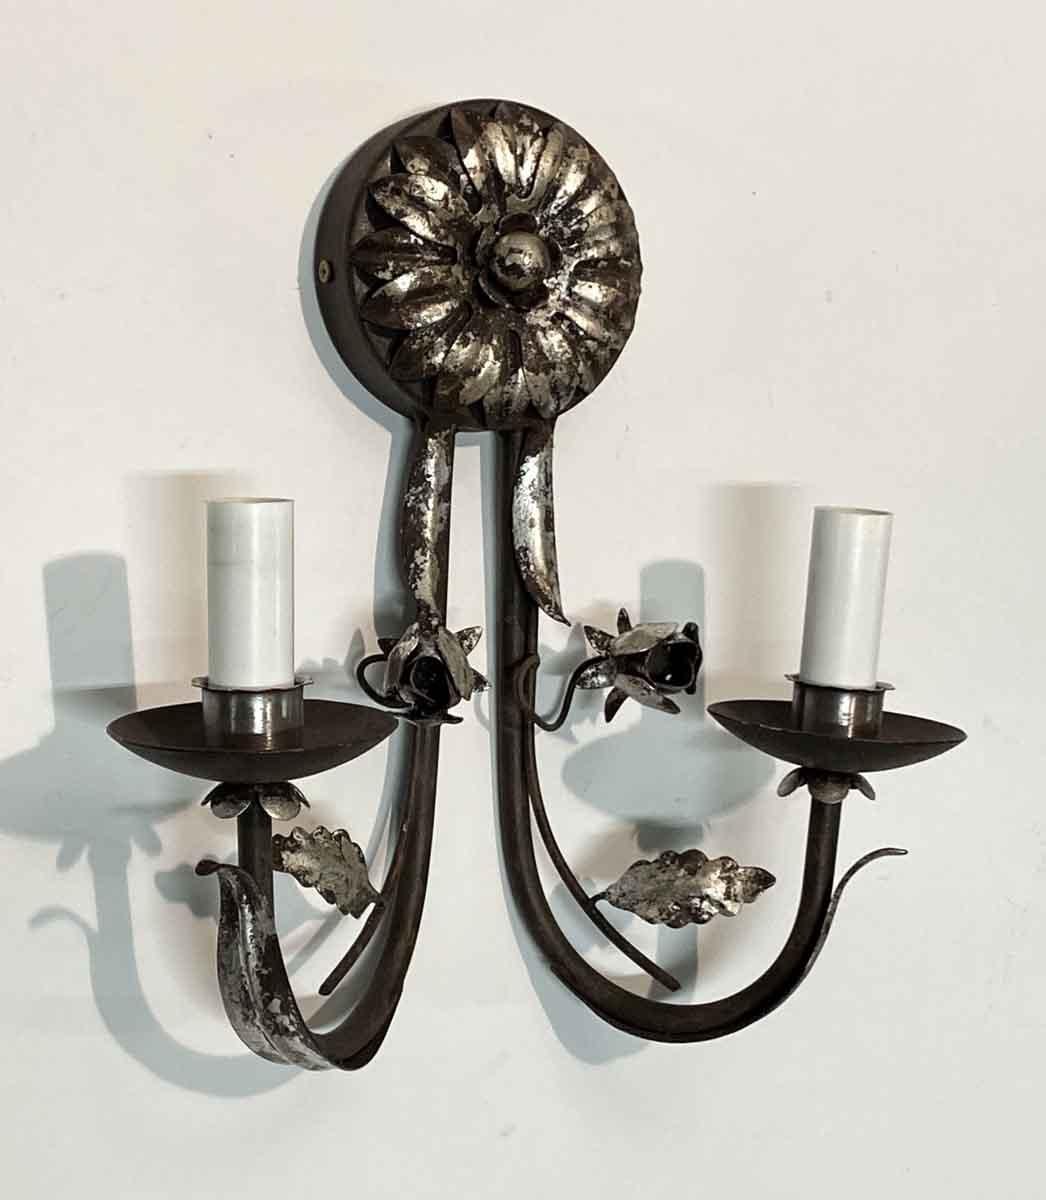 2010s Florentine handwrought iron sunflower sconces with a silver gilt finish. Takes two 60 w candelabra bulbs. Priced each. Wired and ready to ship. Small quantity available at time of posting. Priced each. This can be viewed at our Scranton,